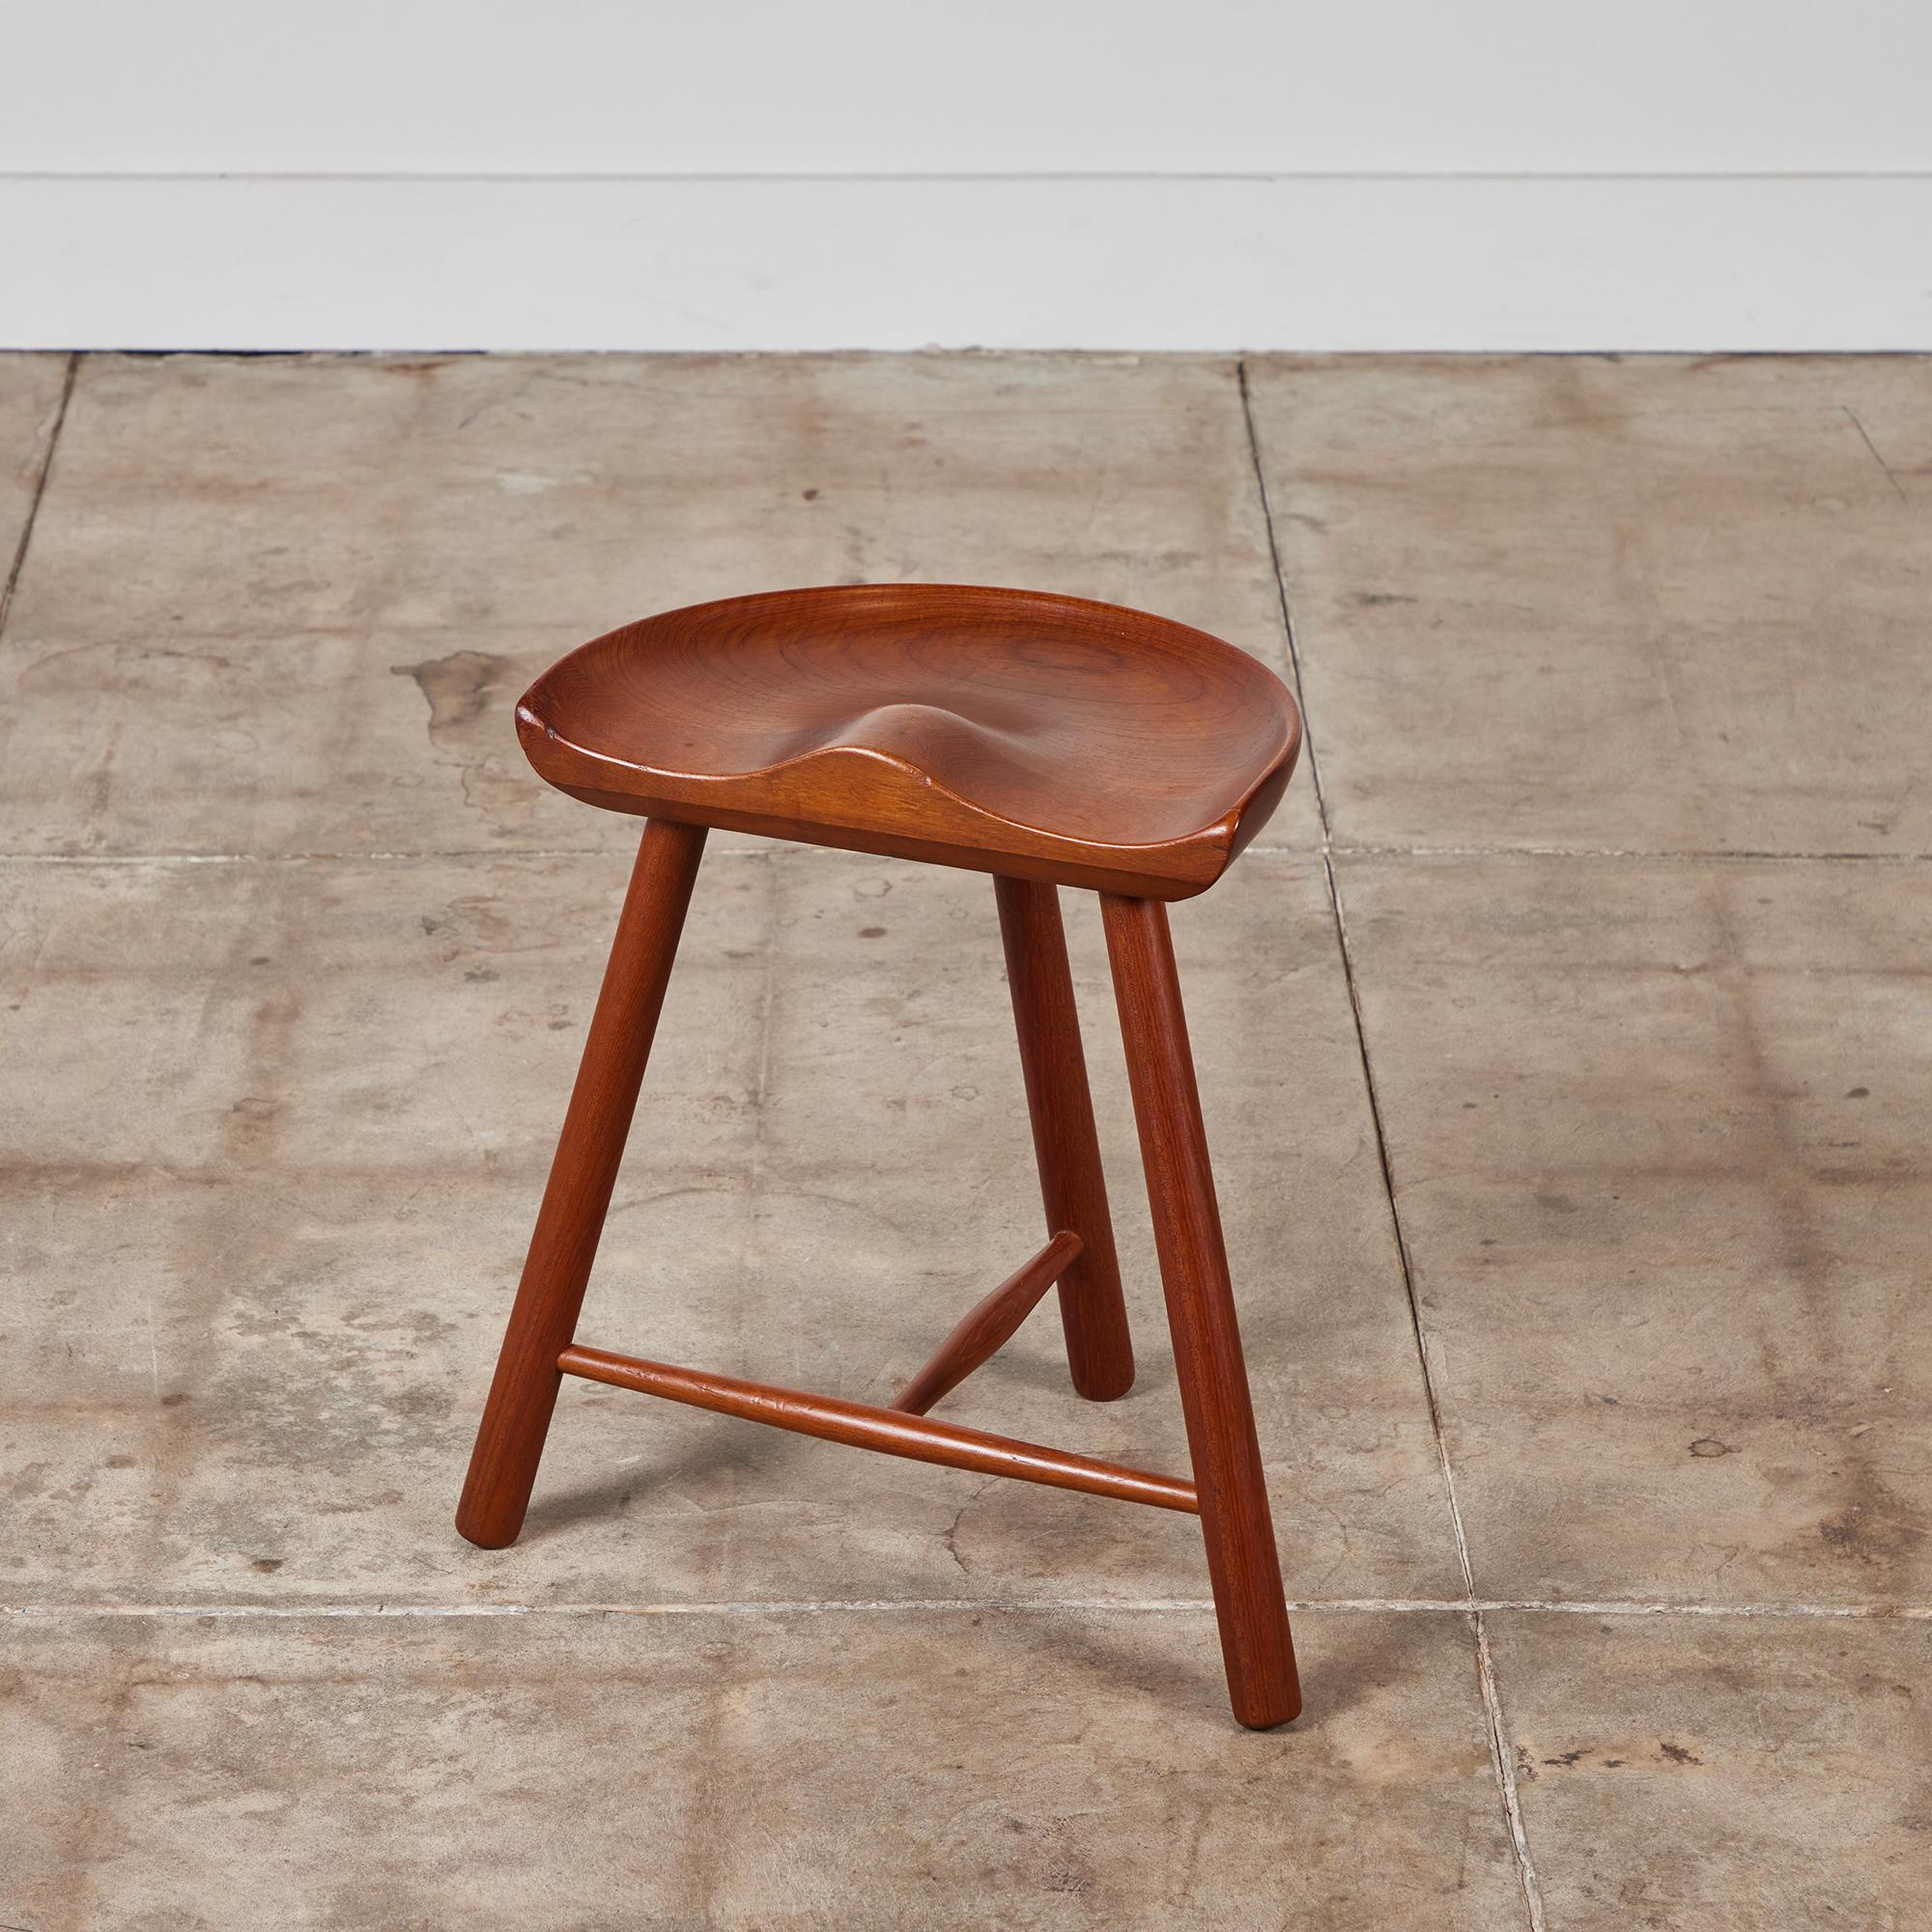 Teak tripod milking stool. The stool features a thick hand carved rounded seat that sits atop three teak turned legs with stretchers.

Dimensions
18